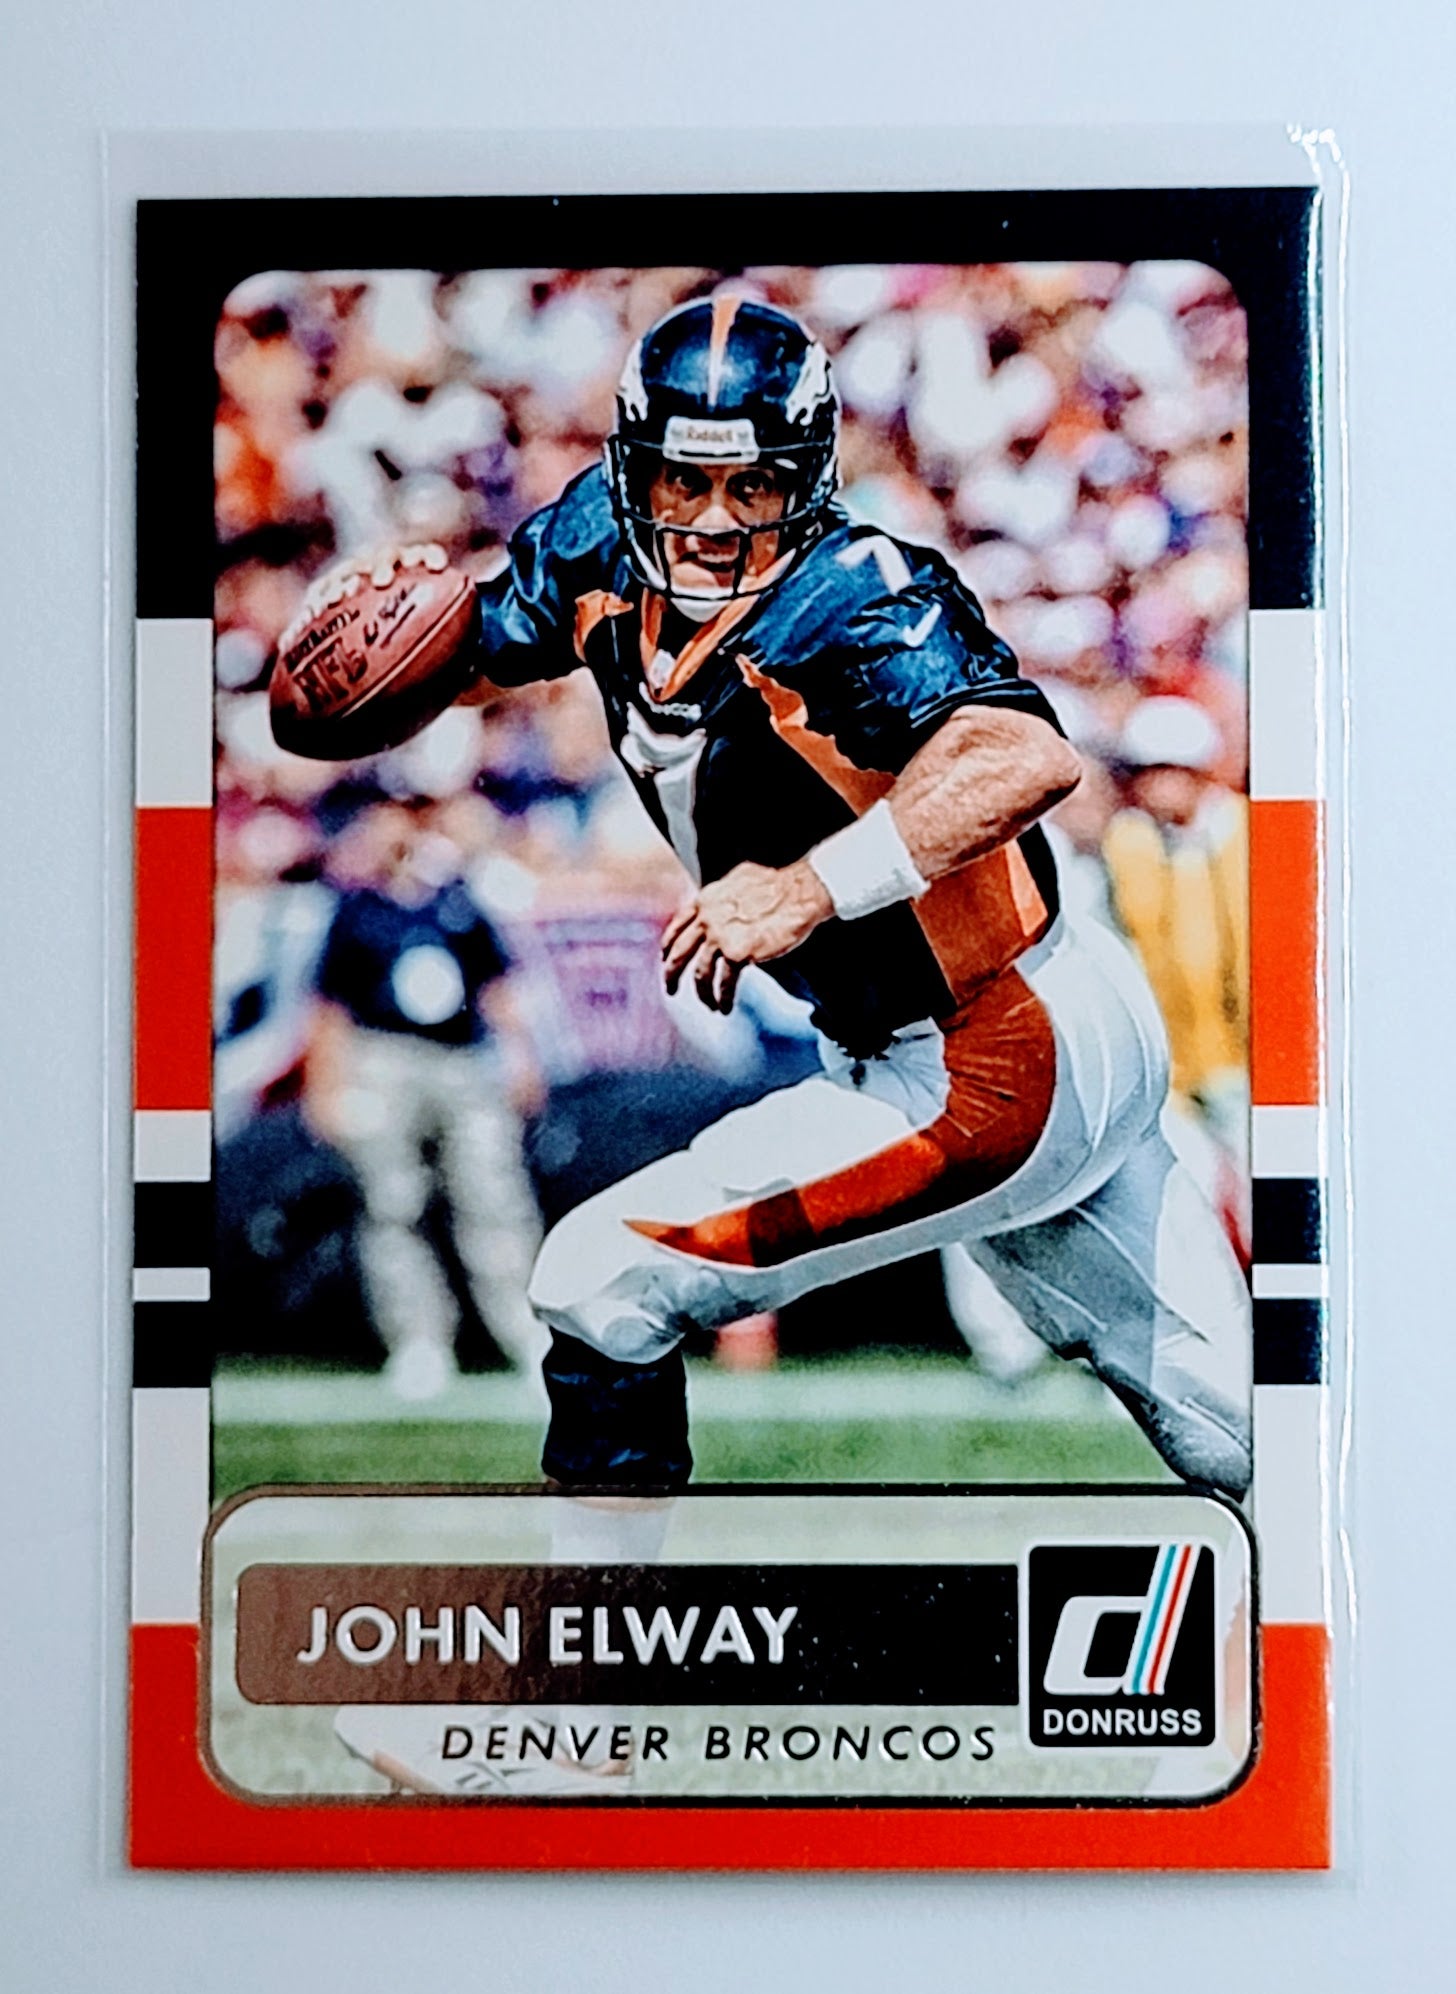 2015 Donruss John Elway   Football Card  TH13C simple Xclusive Collectibles   